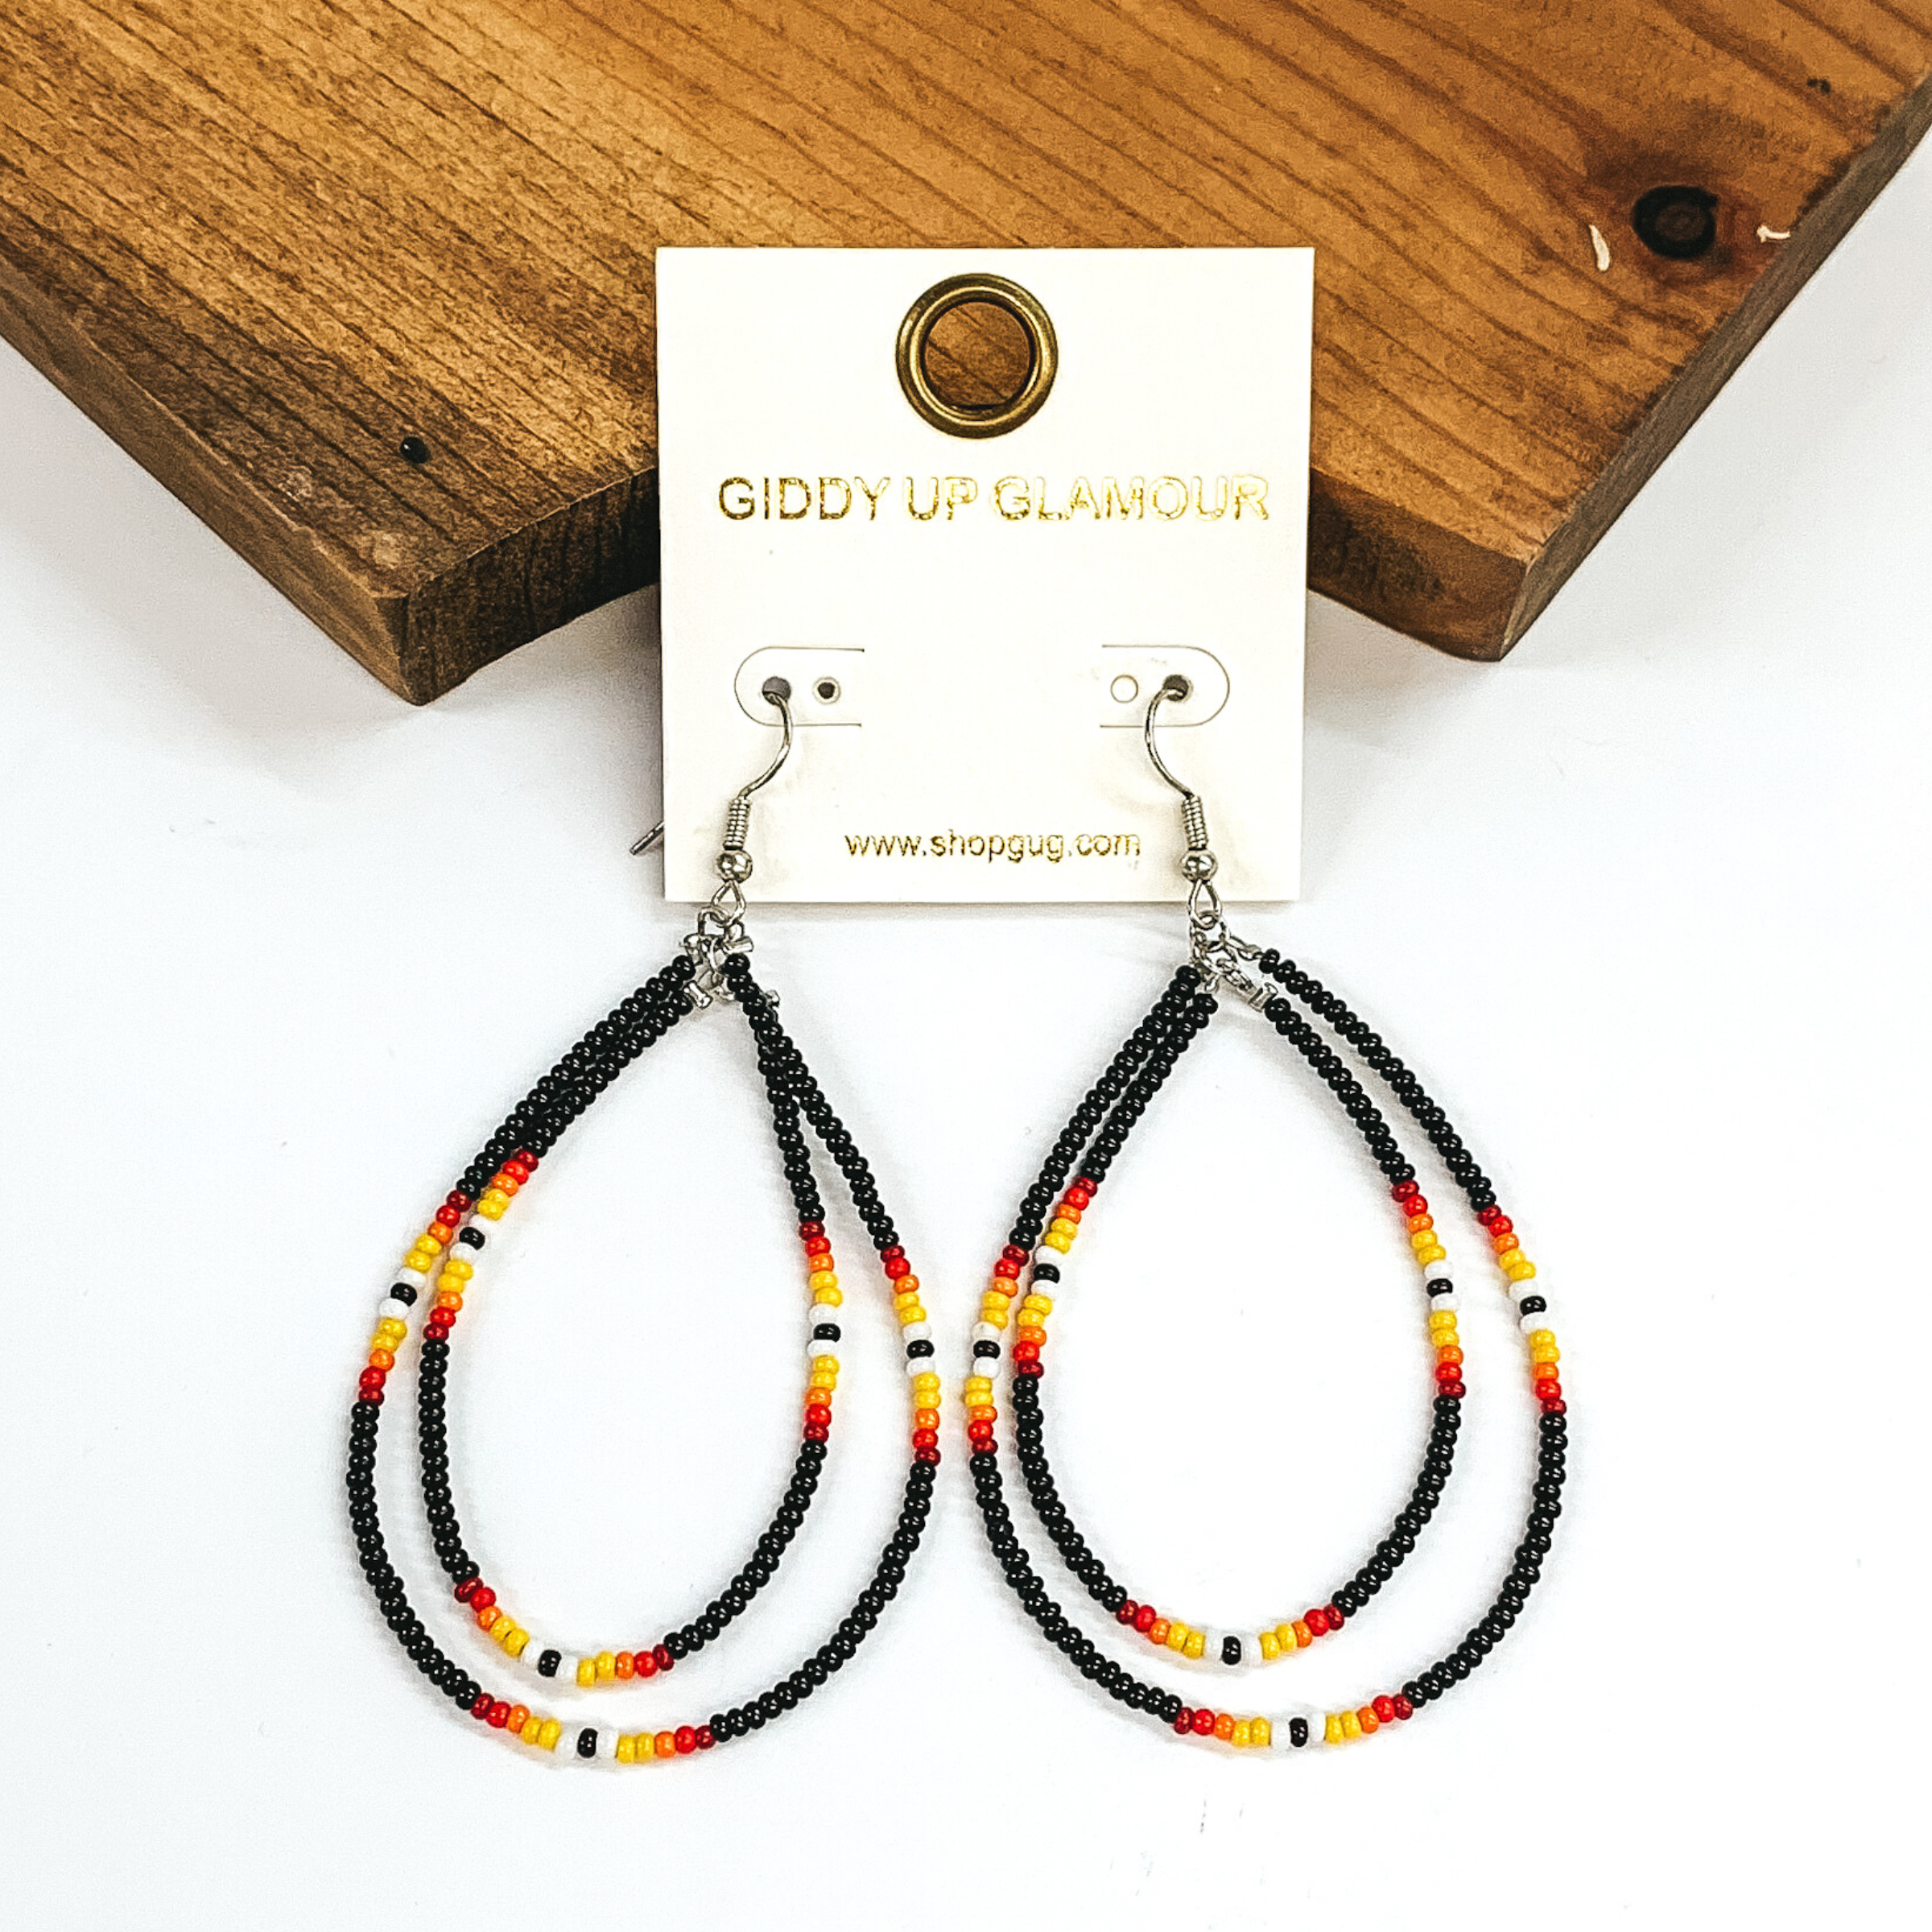 Double layered, hanging beaded teardrop earrings. The majority of the beads are black with three segements including maroon, red, yellow, white, and black beads. hese earrigns are pictured on a white background in front of a dark piece of wood. 